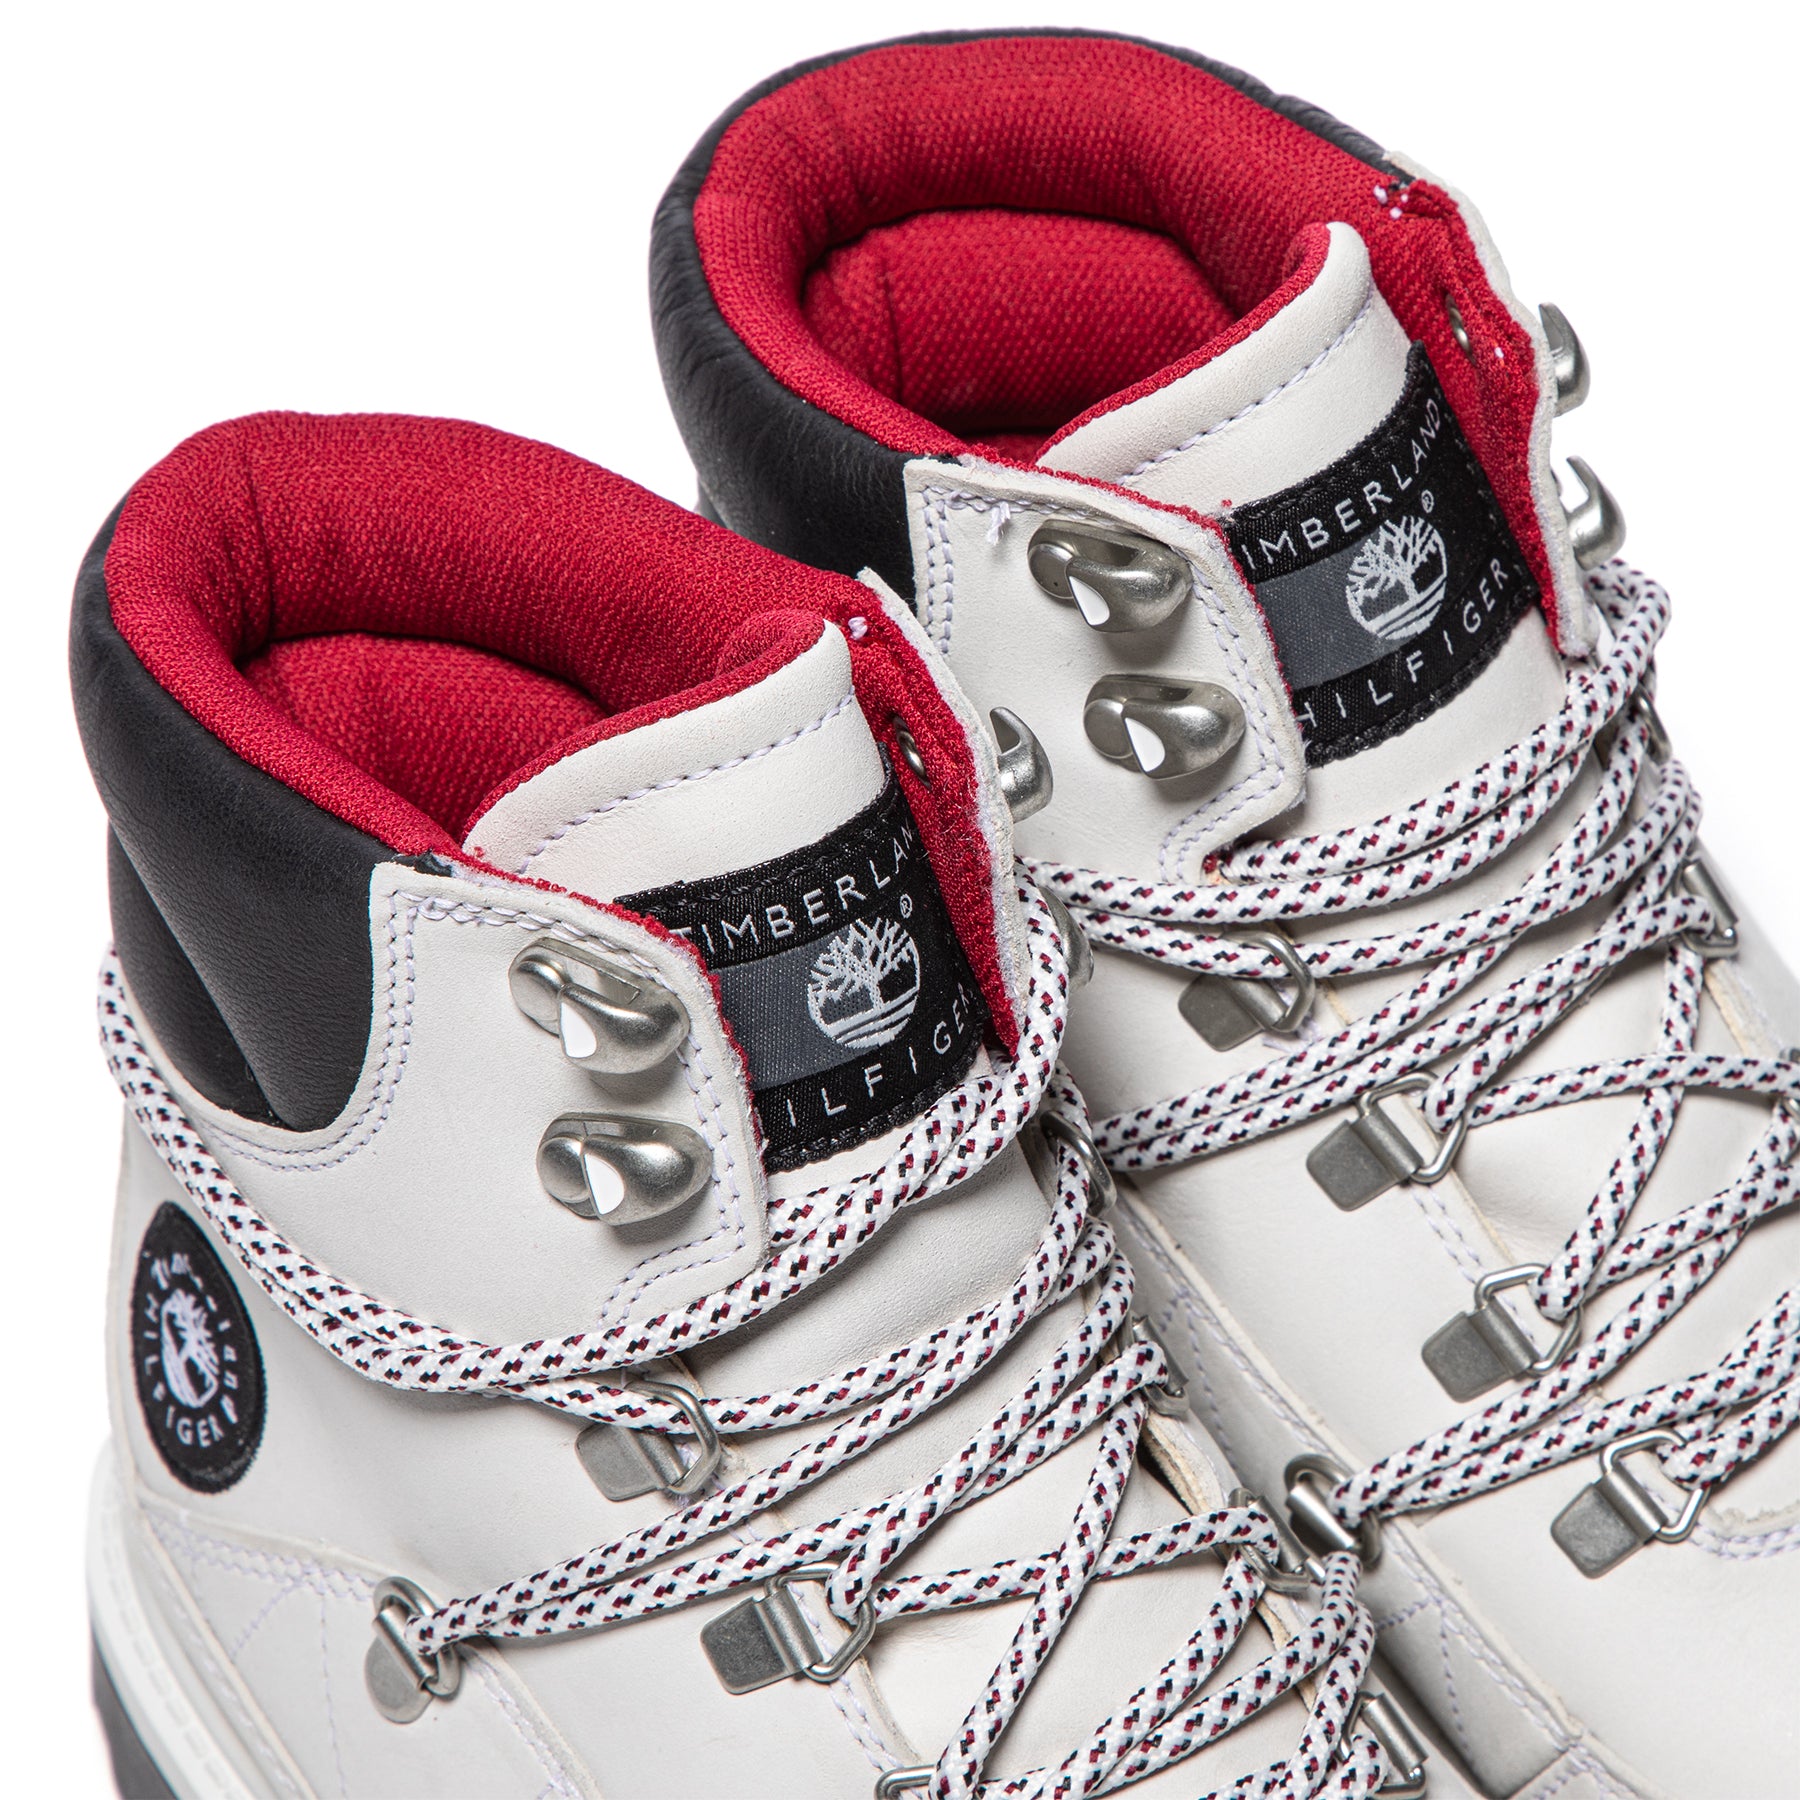 Tommy Hilfiger x Timberland Reimagined Womens 6